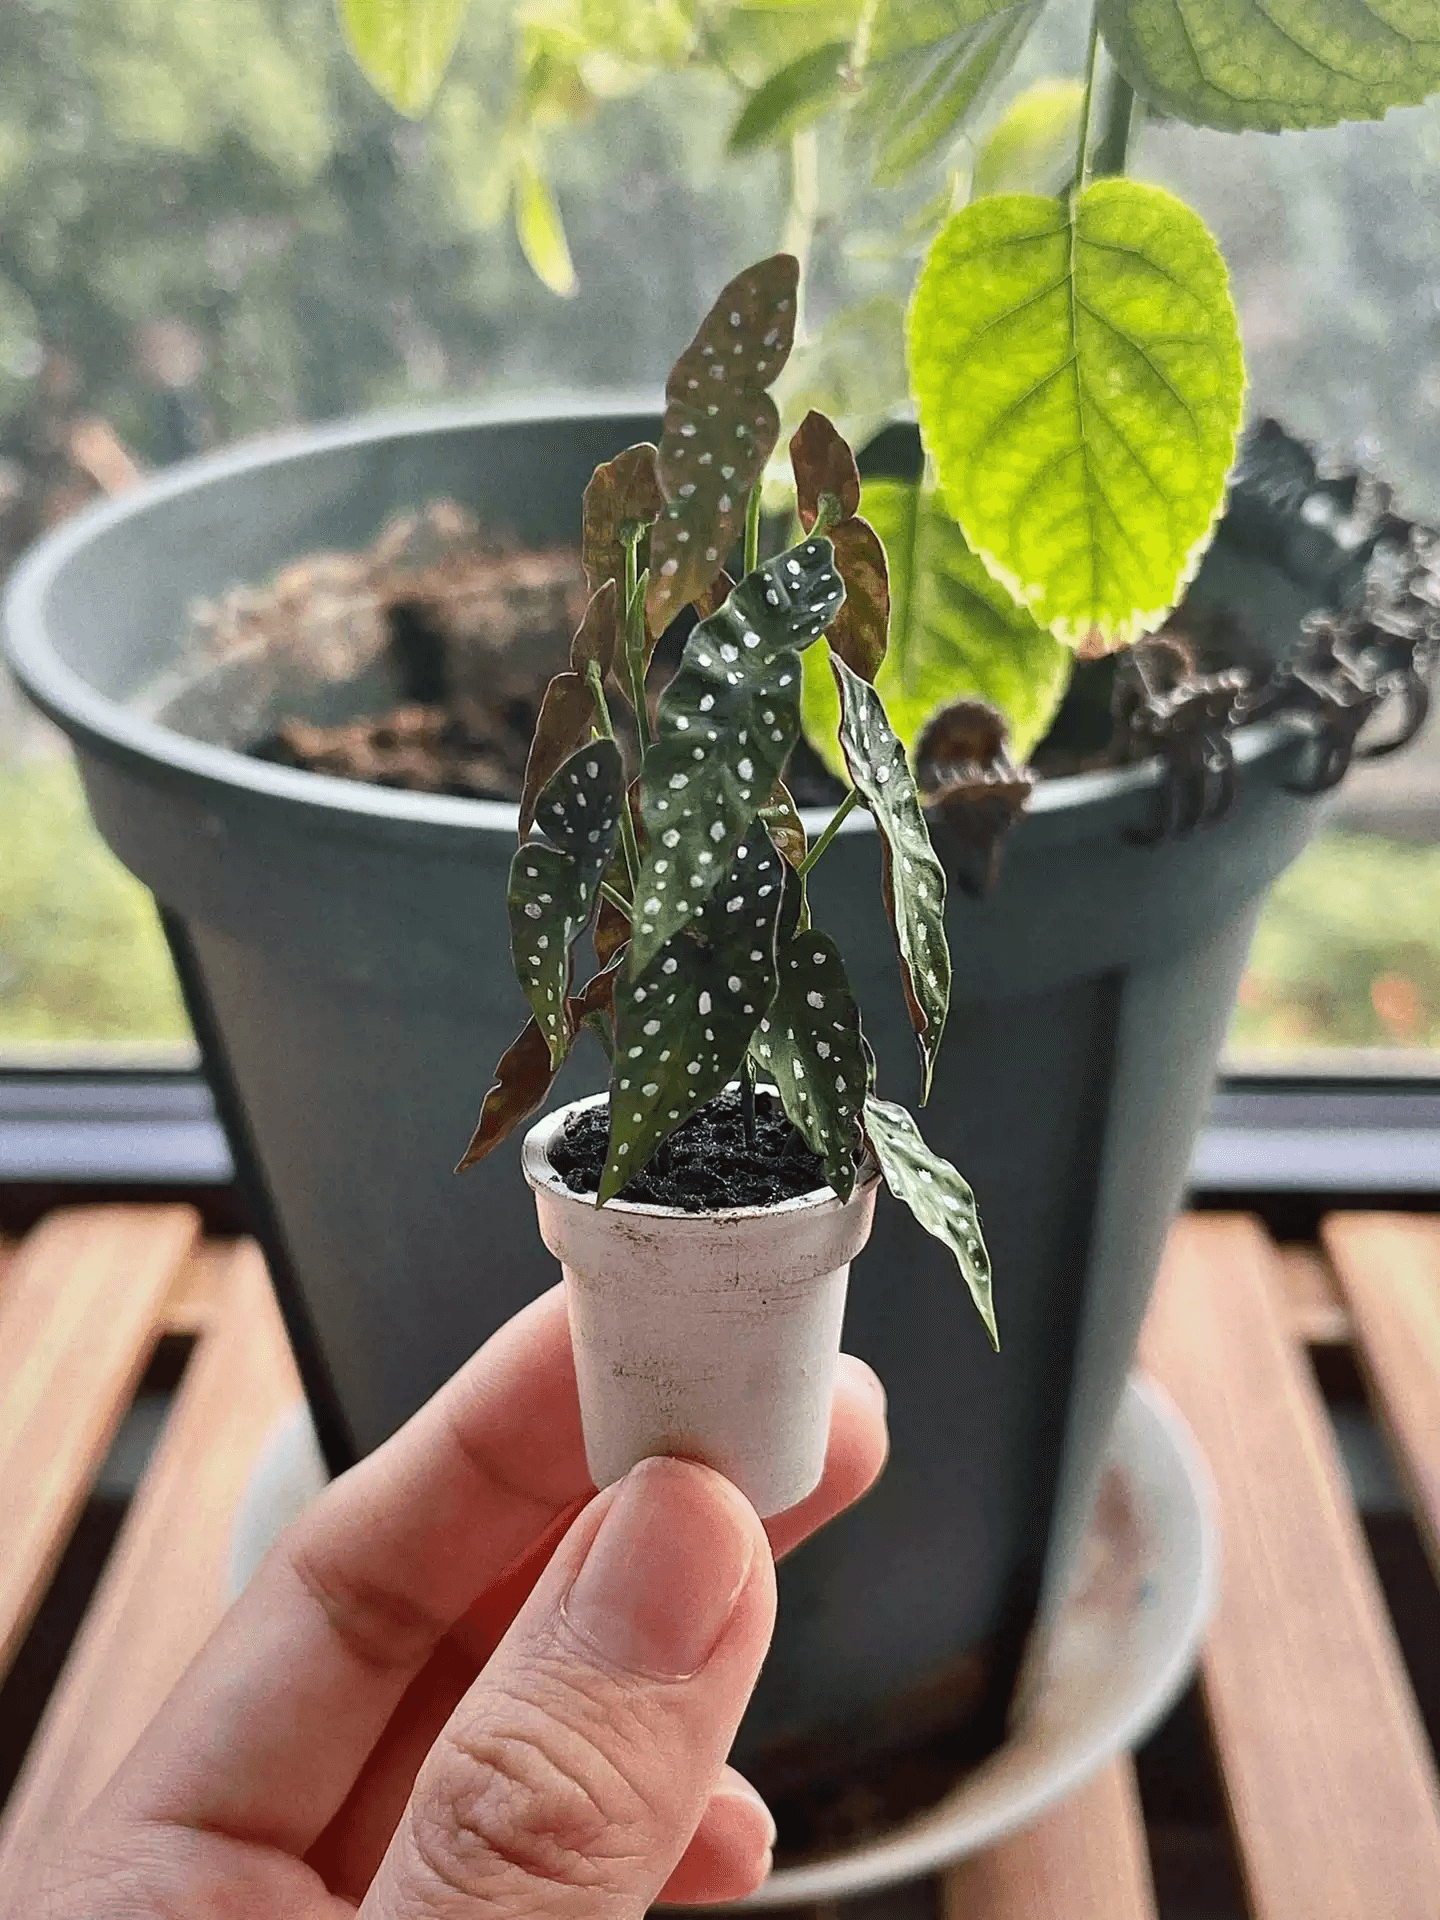 The Begonia Maculata, also known as the Polka Dot Begonia, is nature's fashion statement, donning its dashing speckled leaves like a trendy couture outfit.  Dollhouse Garden Plants Hand-crafted out of clay for plants lover.